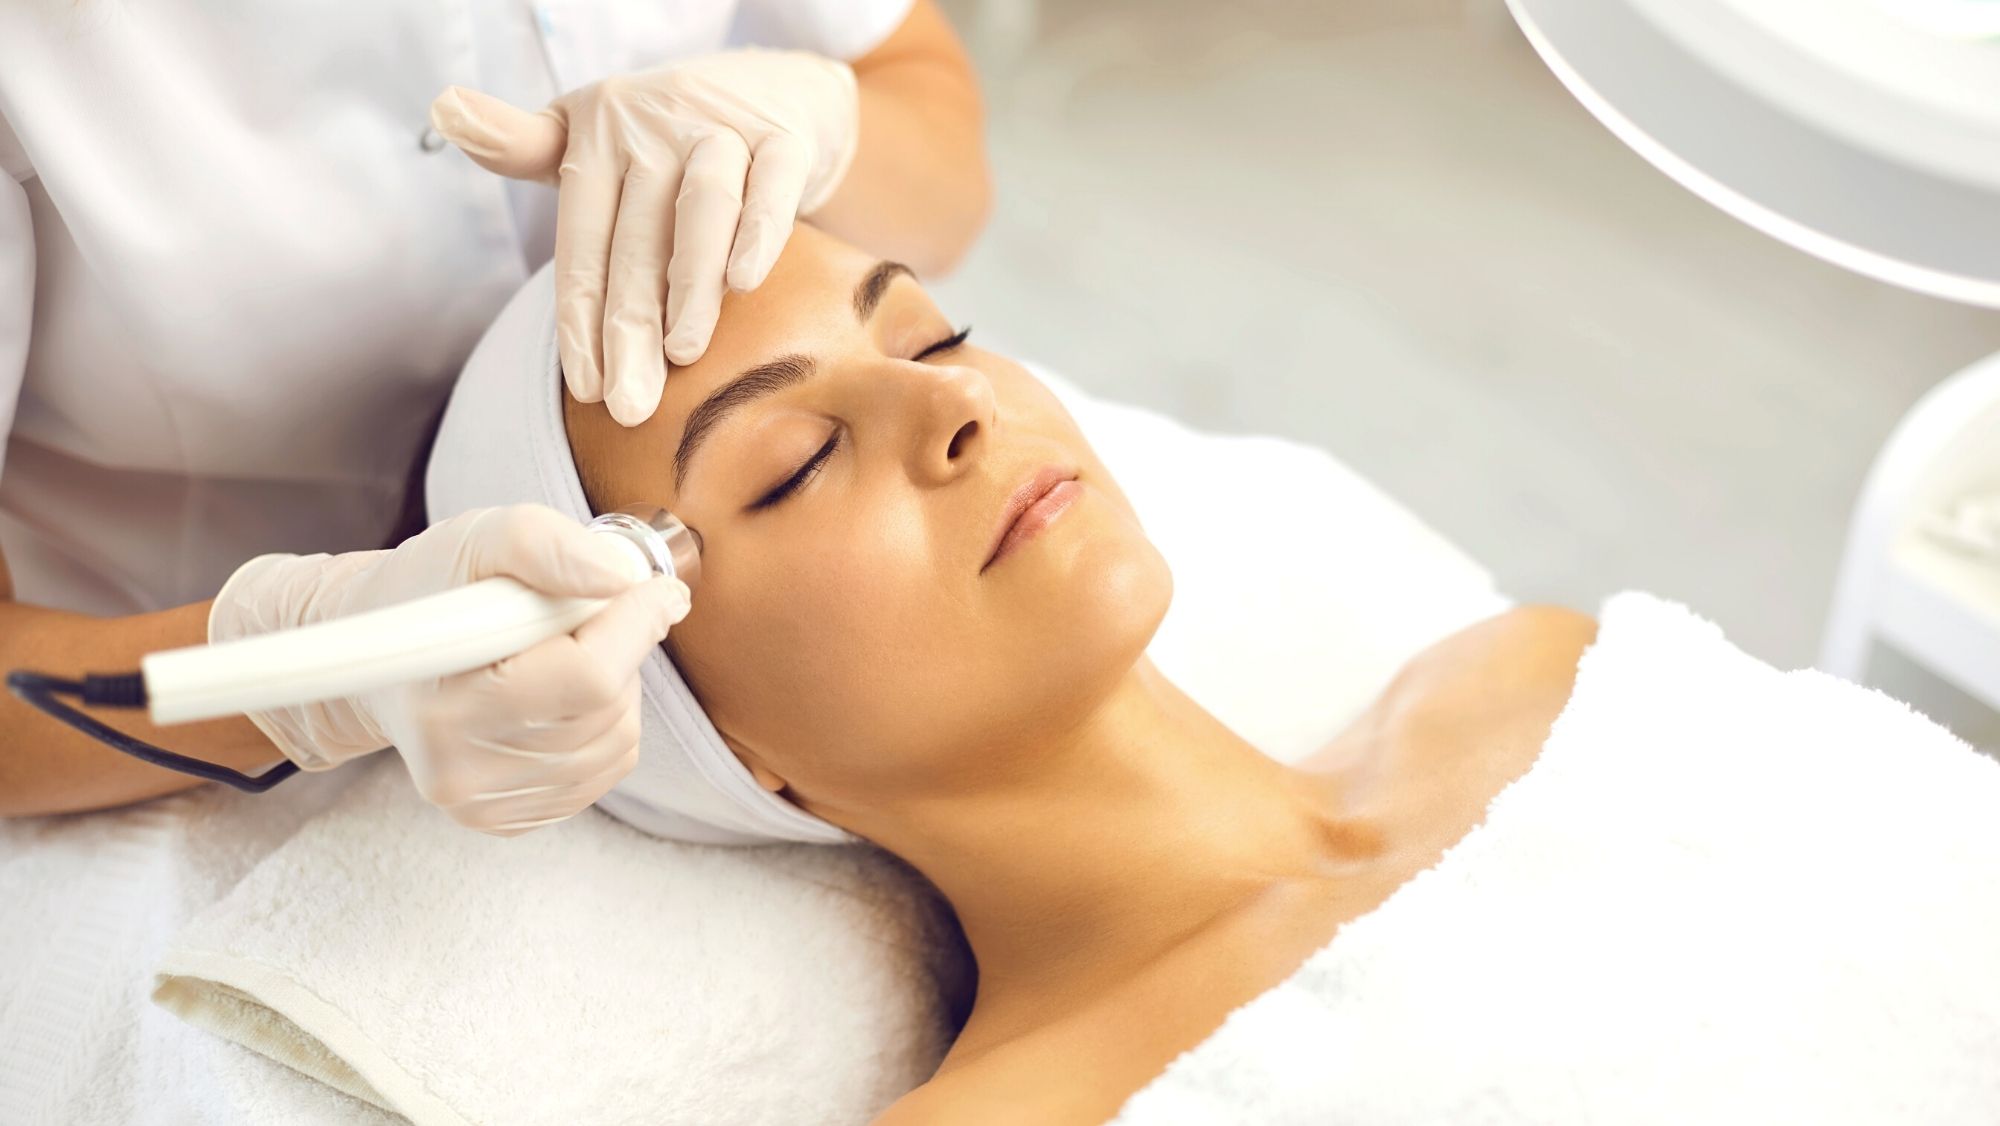 Laser Treatments: Will They Damage Skin?